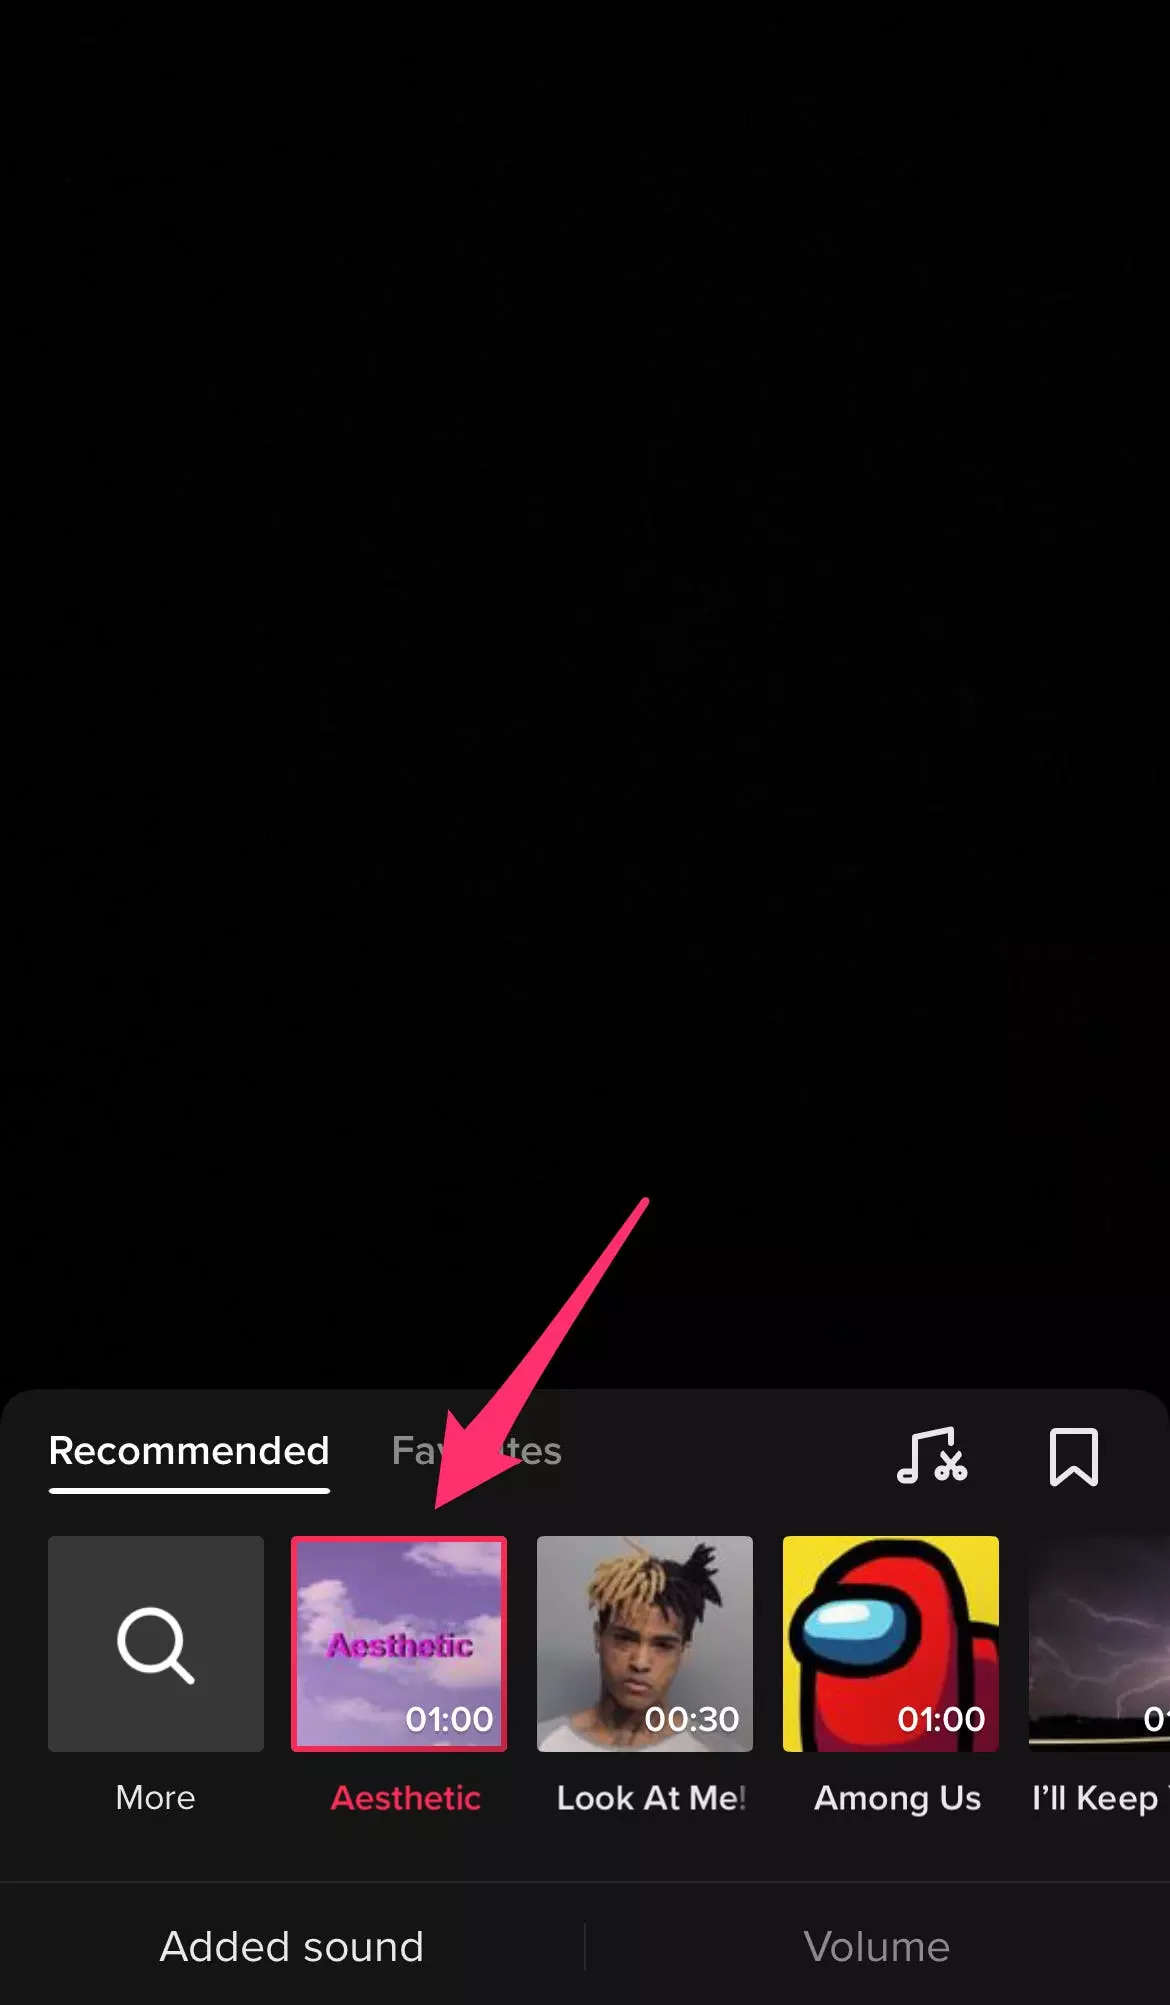 How to make your own sound on TikTok, or add music and voiceover to your videos